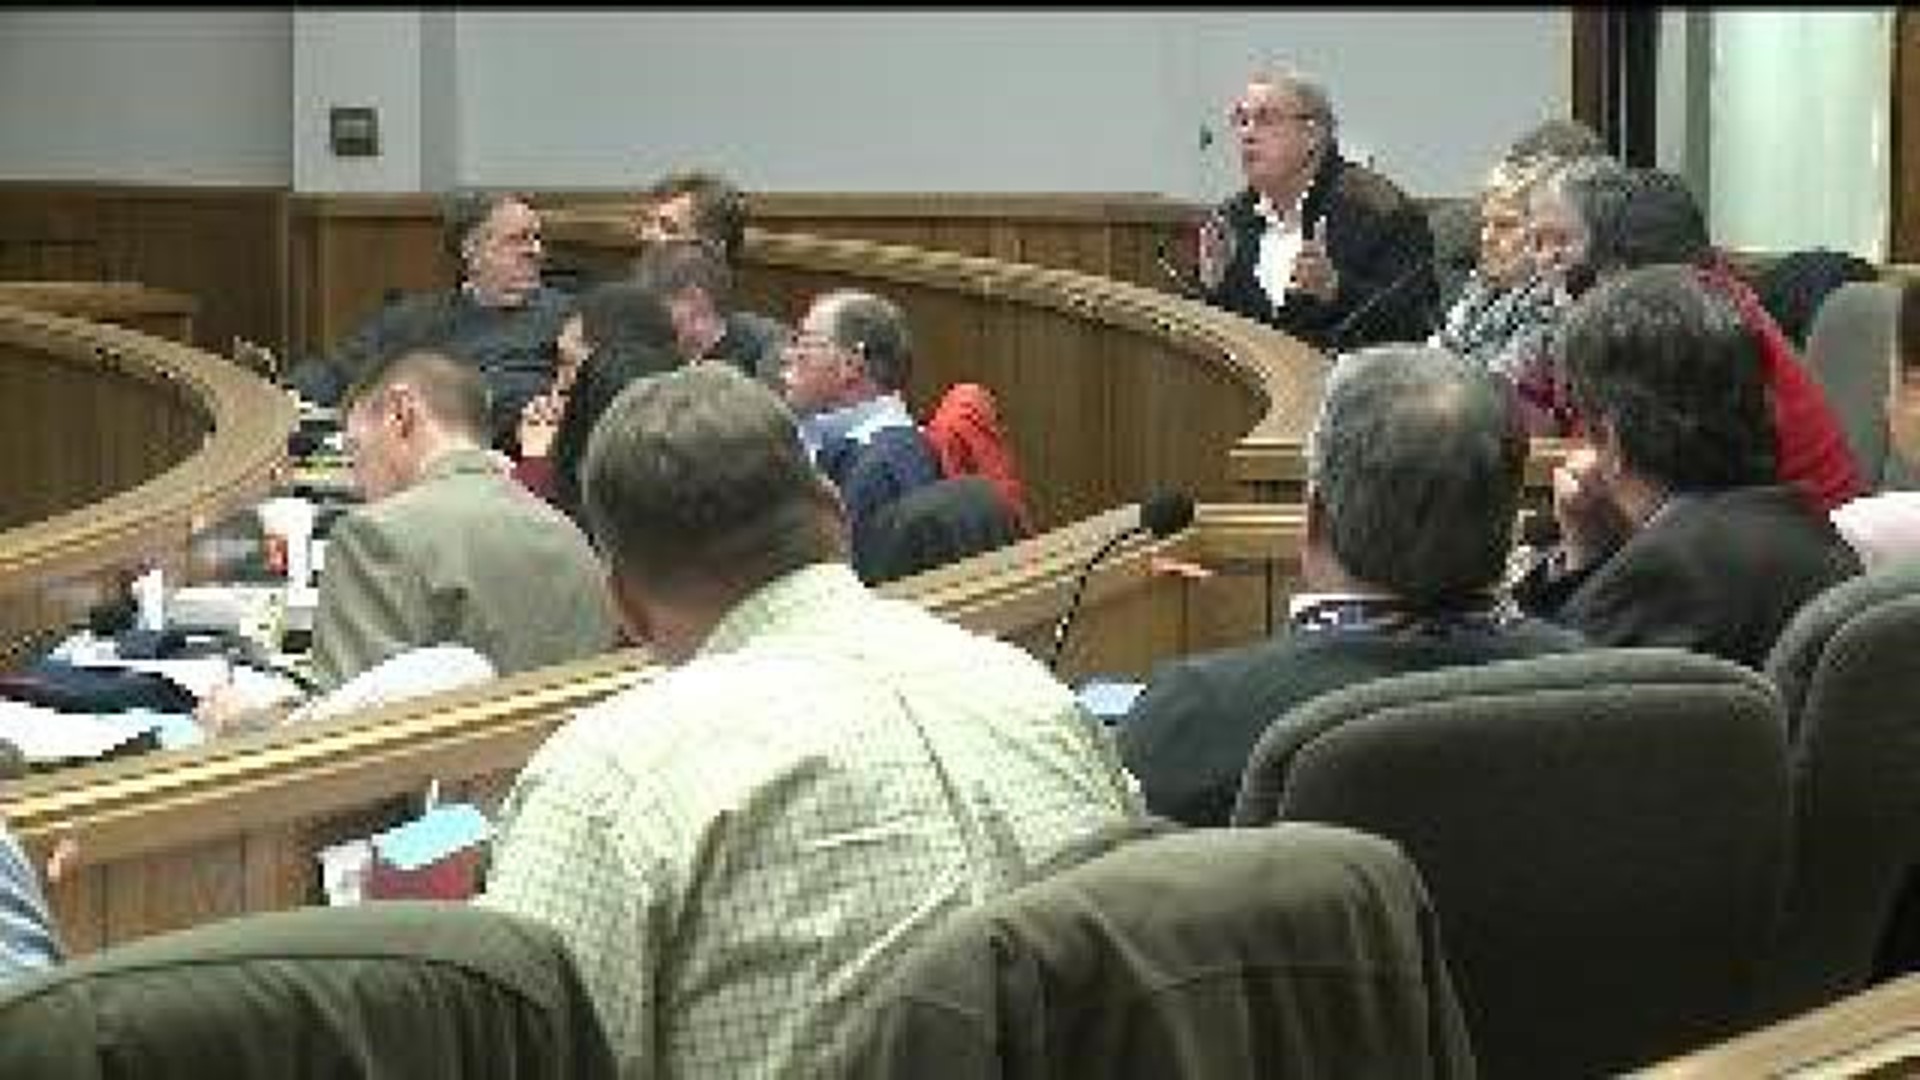 Courthouse Future on Hold